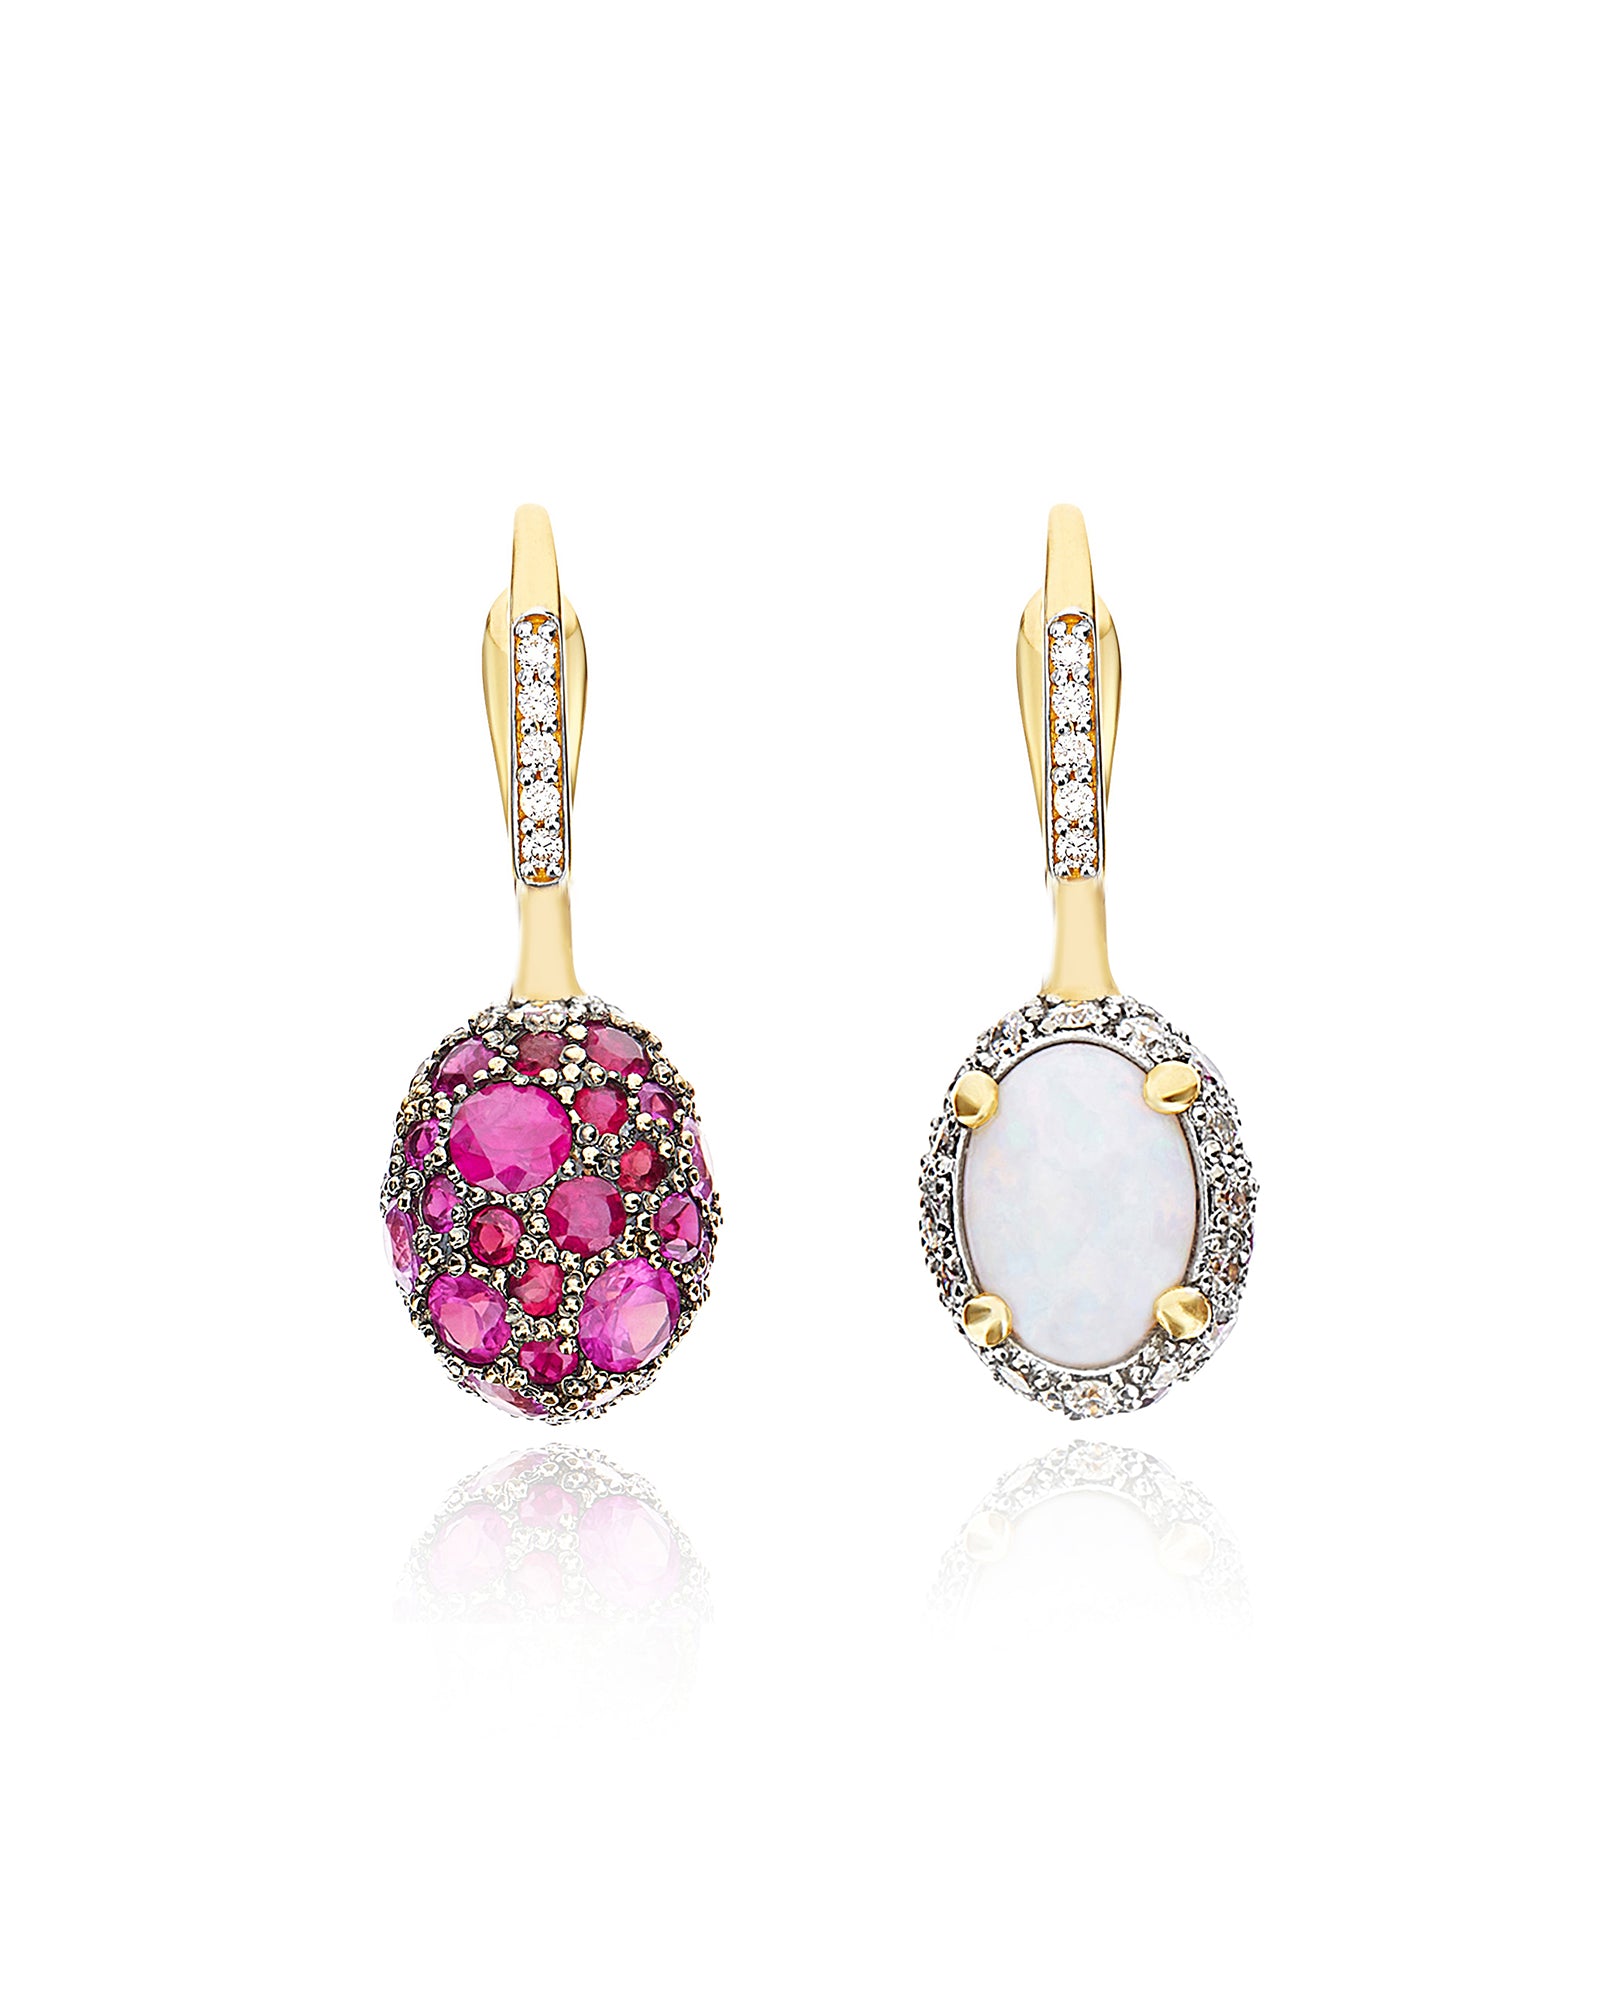 "Reverse" Ciliegine Gold, Pink Sapphires, Rubies, White Australian Opal and Diamonds Double-face Ball Drop Earrings (SMALL)